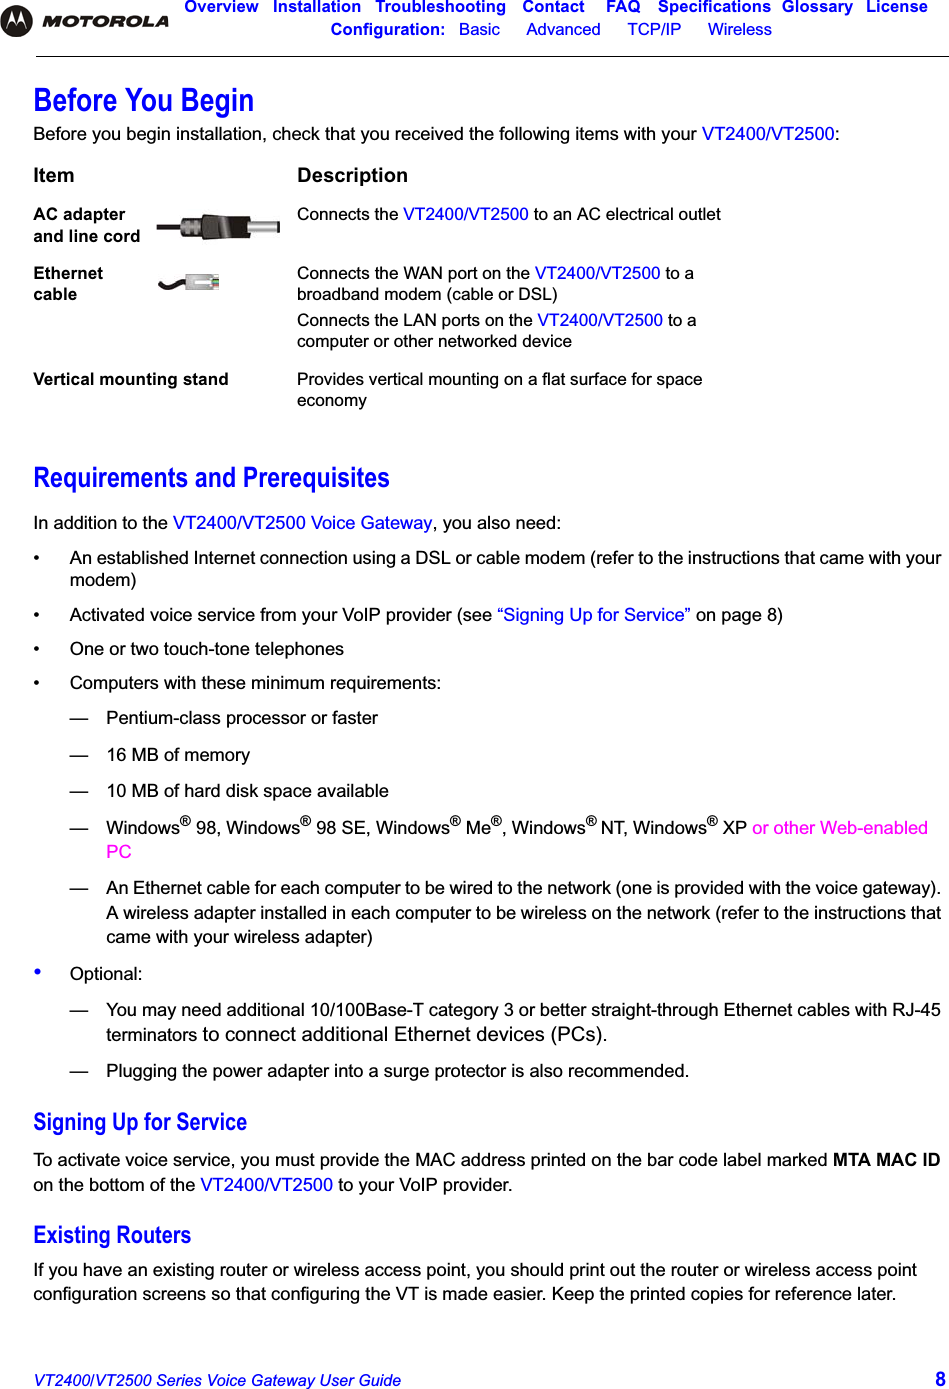 Overview Installation Troubleshooting Contact FAQ Specifications Glossary LicenseConfiguration:   Basic      Advanced      TCP/IP      Wireless VT2400/VT2500 Series Voice Gateway User Guide 8Before You BeginBefore you begin installation, check that you received the following items with your VT2400/VT2500:Requirements and PrerequisitesIn addition to the VT2400/VT2500 Voice Gateway, you also need:•  An established Internet connection using a DSL or cable modem (refer to the instructions that came with your modem)•  Activated voice service from your VoIP provider (see “Signing Up for Service” on page 8)•  One or two touch-tone telephones•  Computers with these minimum requirements:— Pentium-class processor or faster— 16 MB of memory— 10 MB of hard disk space available— Windows® 98, Windows® 98 SE, Windows® Me®, Windows®NT, Windows® XP or other Web-enabled PC— An Ethernet cable for each computer to be wired to the network (one is provided with the voice gateway). A wireless adapter installed in each computer to be wireless on the network (refer to the instructions that came with your wireless adapter)•Optional:— You may need additional 10/100Base-T category 3 or better straight-through Ethernet cables with RJ-45 terminators to connect additional Ethernet devices (PCs).— Plugging the power adapter into a surge protector is also recommended.Signing Up for ServiceTo activate voice service, you must provide the MAC address printed on the bar code label marked MTA MAC ID on the bottom of the VT2400/VT2500 to your VoIP provider. Existing RoutersIf you have an existing router or wireless access point, you should print out the router or wireless access point configuration screens so that configuring the VT is made easier. Keep the printed copies for reference later.Item DescriptionAC adapter and line cordConnects the VT2400/VT2500 to an AC electrical outletEthernet cableConnects the WAN port on the VT2400/VT2500 to a broadband modem (cable or DSL)Connects the LAN ports on the VT2400/VT2500 to a computer or other networked deviceVertical mounting stand Provides vertical mounting on a flat surface for space economy